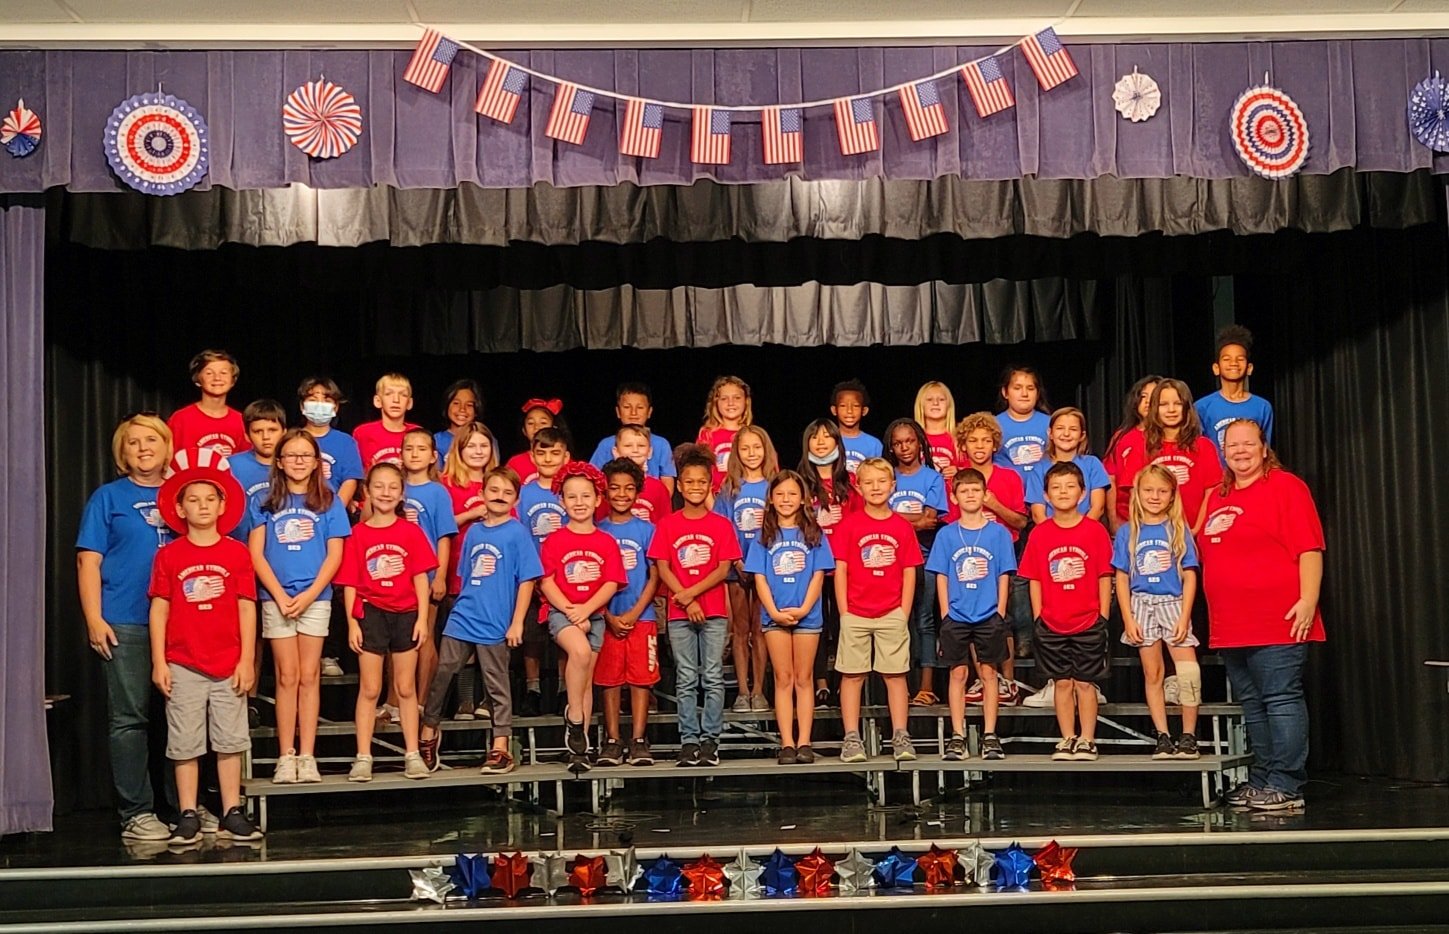 Patriotic performance was a hit at South Elementary School